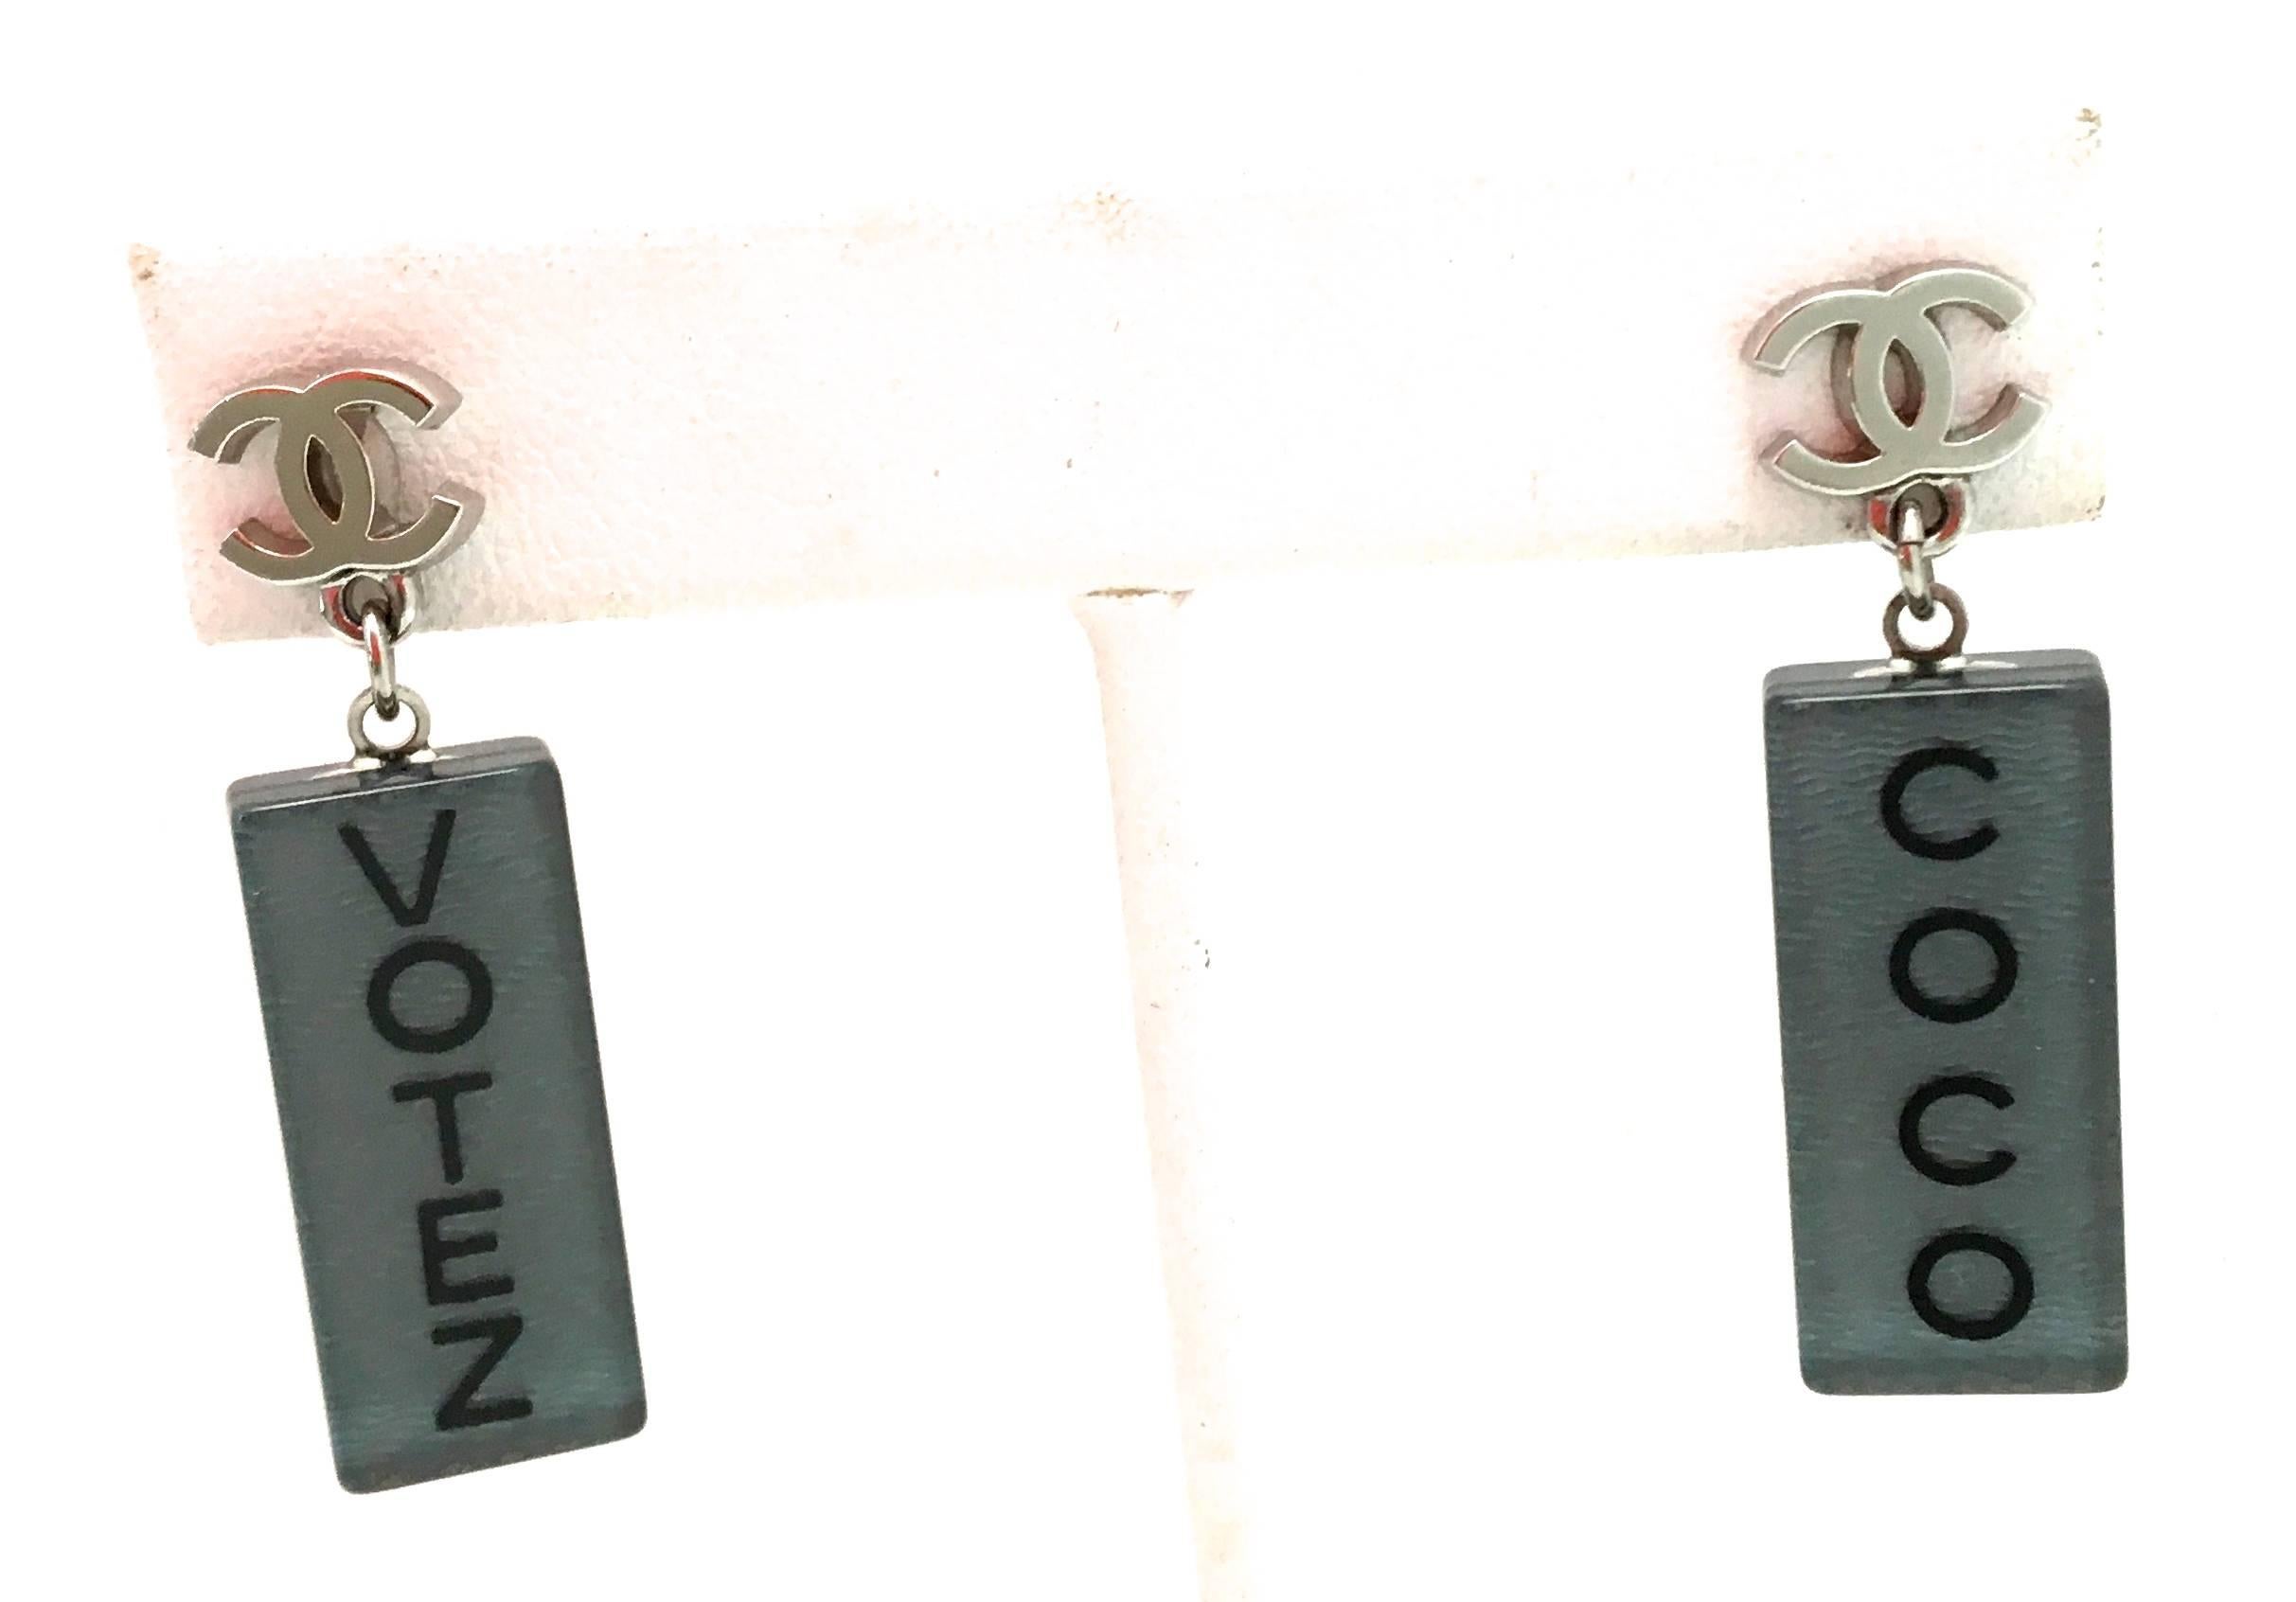 Presented here is a new pair of Chanel lucite earrings. Each earring has a silver tone CC logo with dangling lucite rectangles with a gray / blue color tone on either side of the earring. One earring says 'Votez' and the other says 'Coco.' The